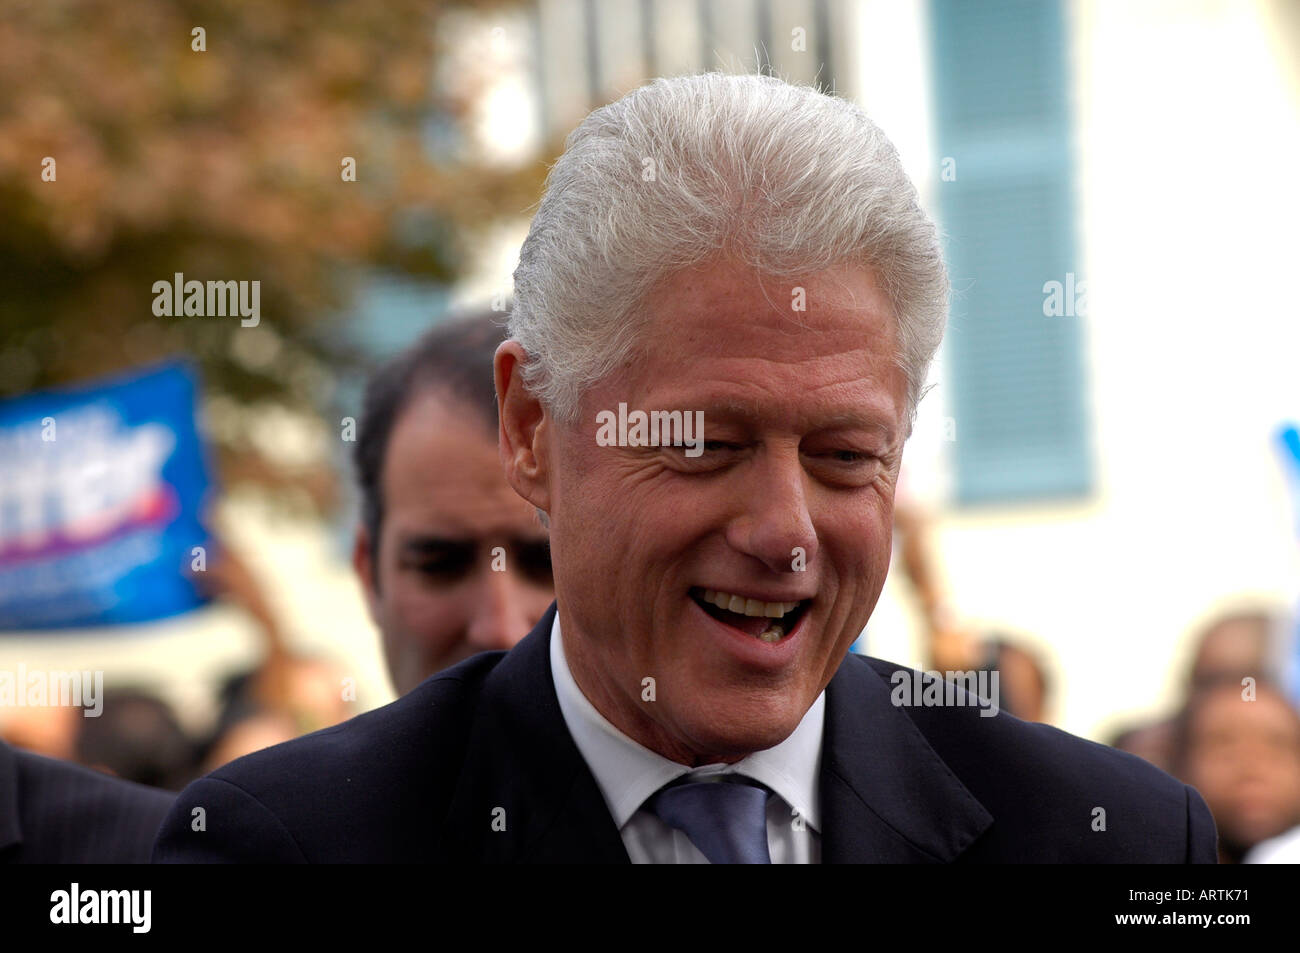 Former President Bill Clinton appears at an endorsement event in the Bronx NYC Stock Photo